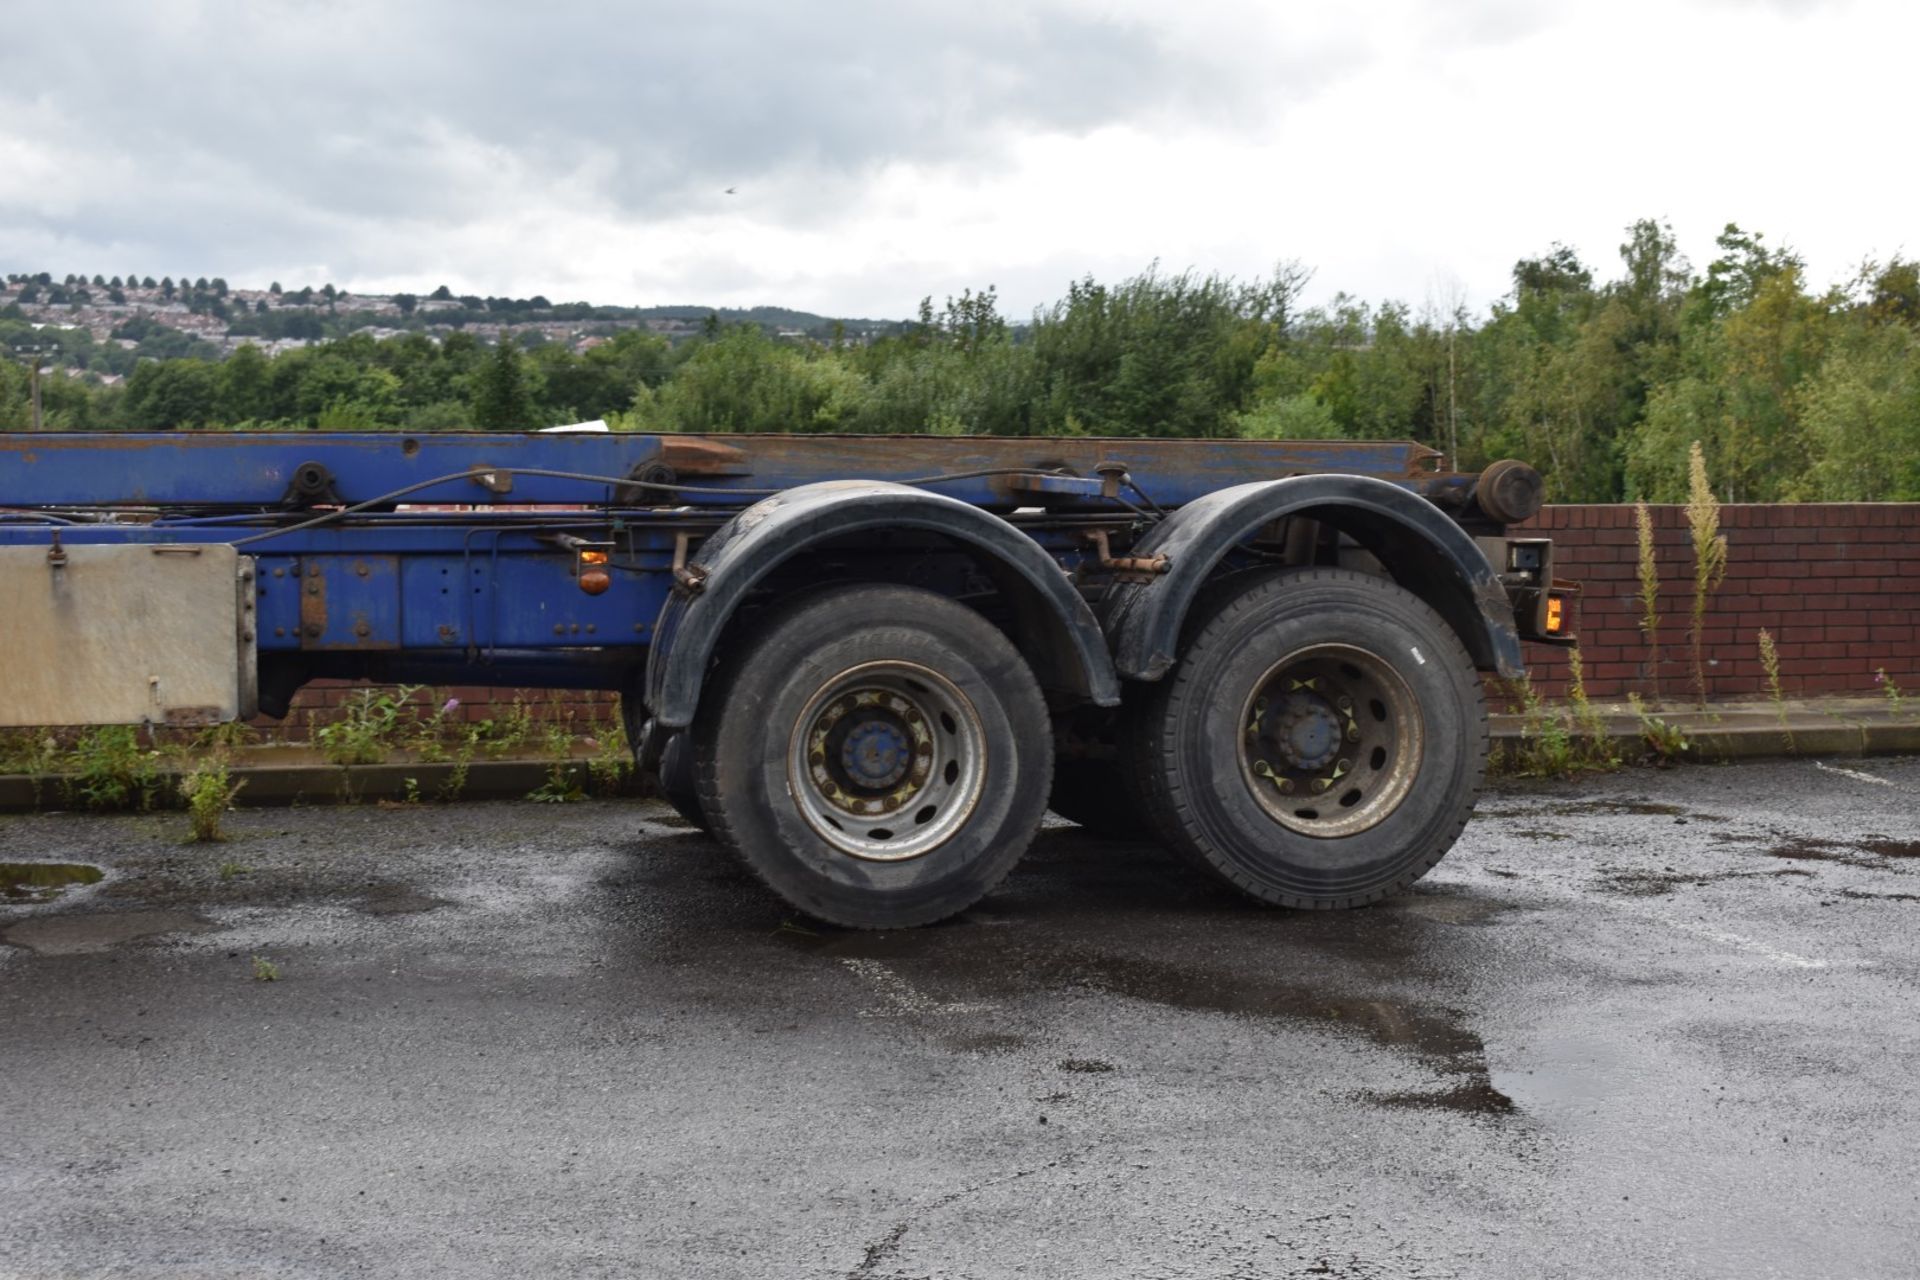 1 x Volvo 340 Plant Lorry With Tipper Chasis and Fitted Winch - CL547 - Location: South Yorkshire. - Image 24 of 25